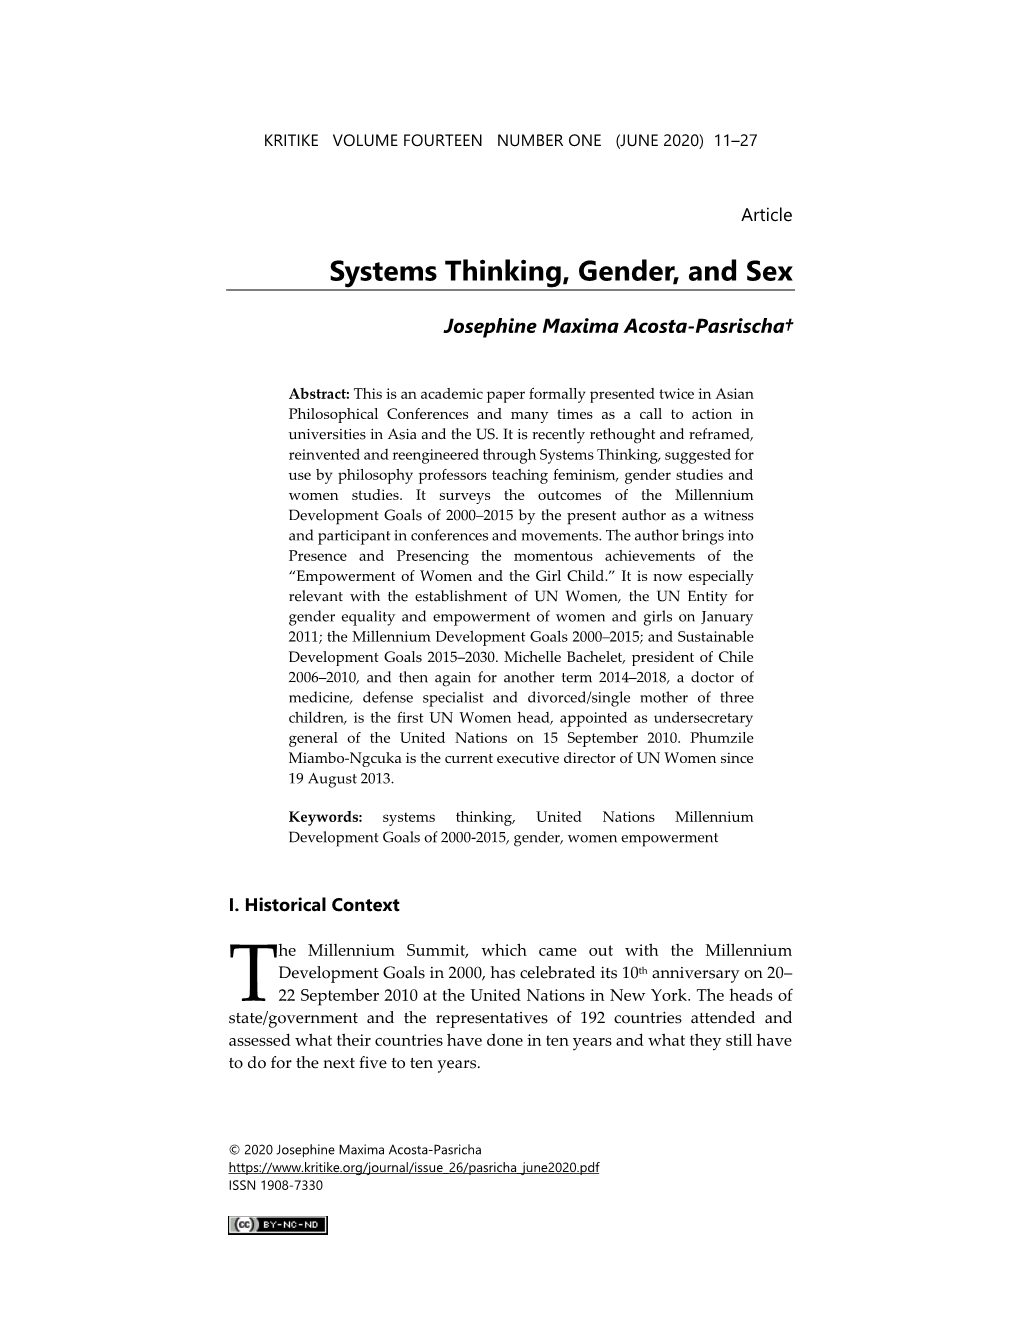 Systems Thinking, Gender, and Sex